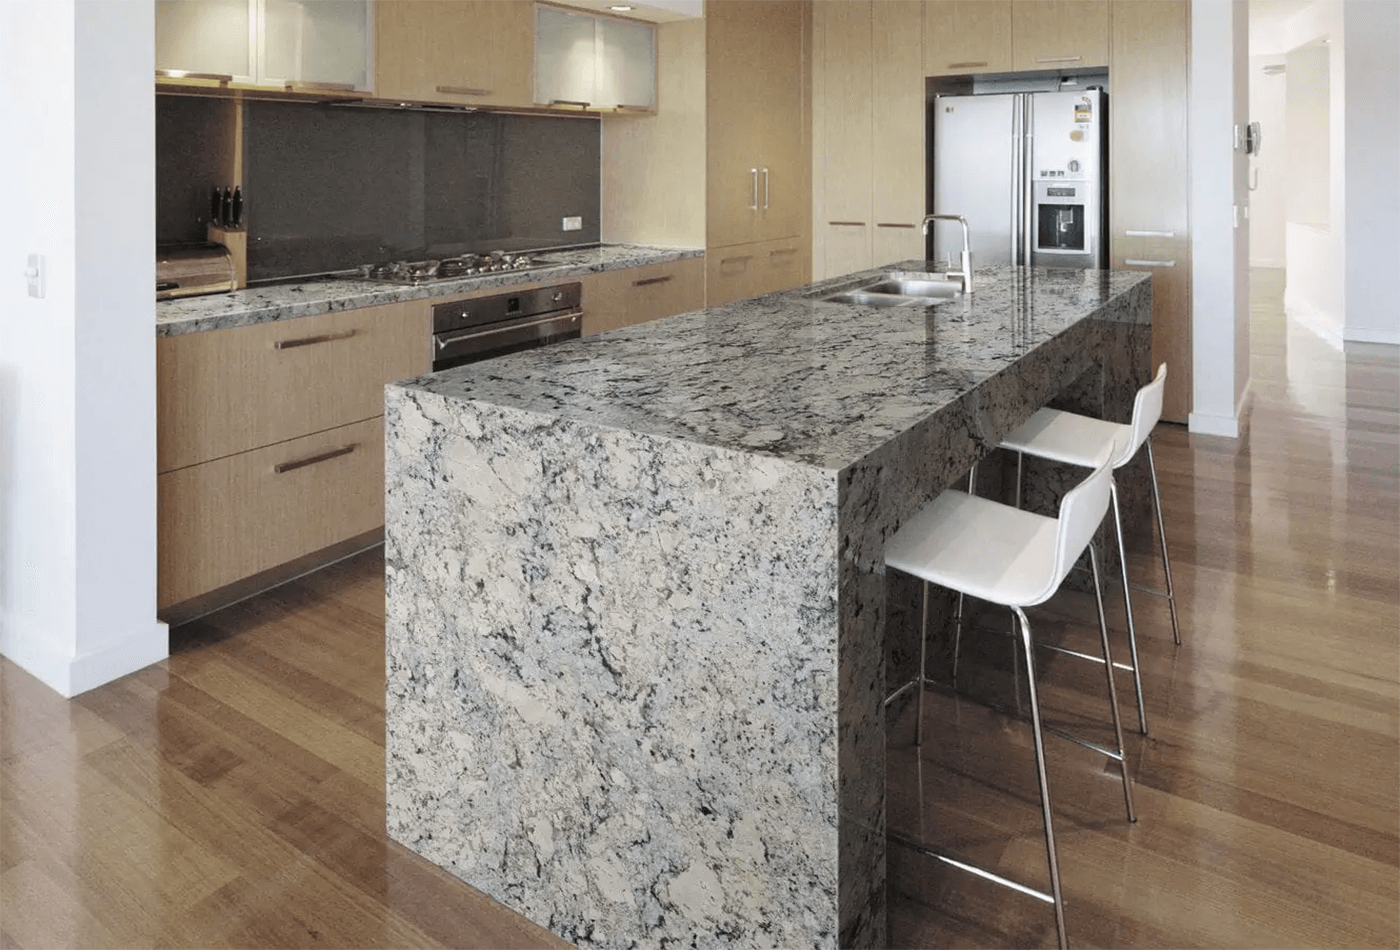 Need to know more about Alaska Granite Surface